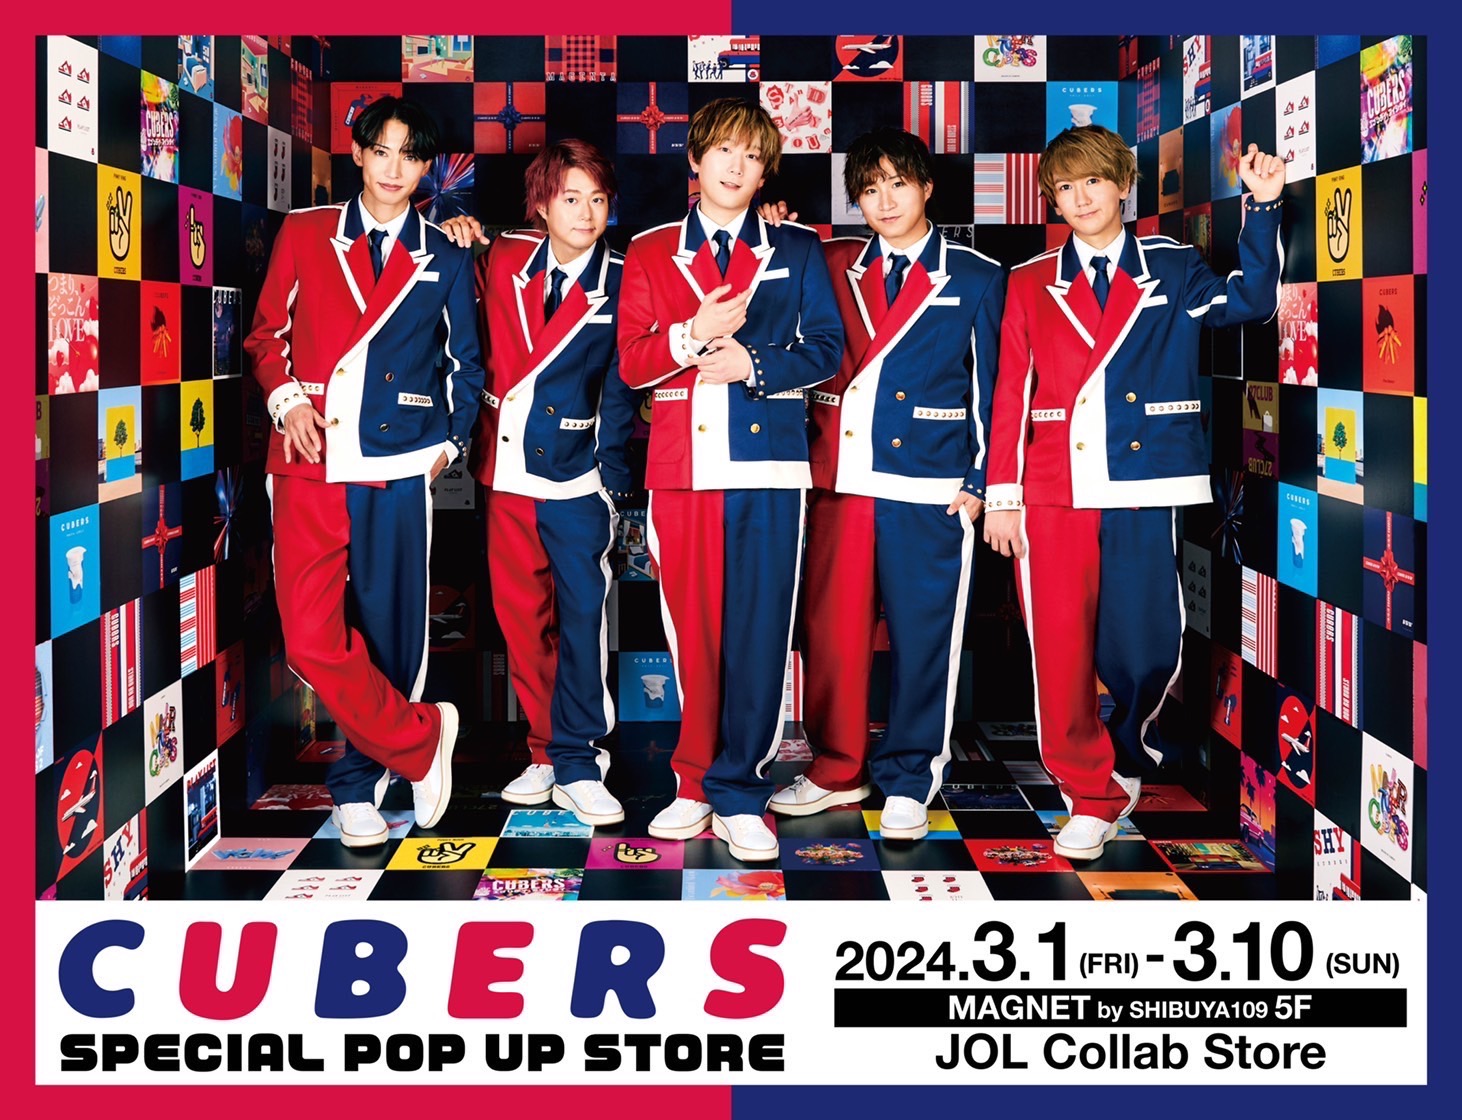 【BIG NEWS1】3月1日(金) – 3月10日(日)で『CUBERS SPECIAL POP-UP STORE』が期間限定で開催決定！